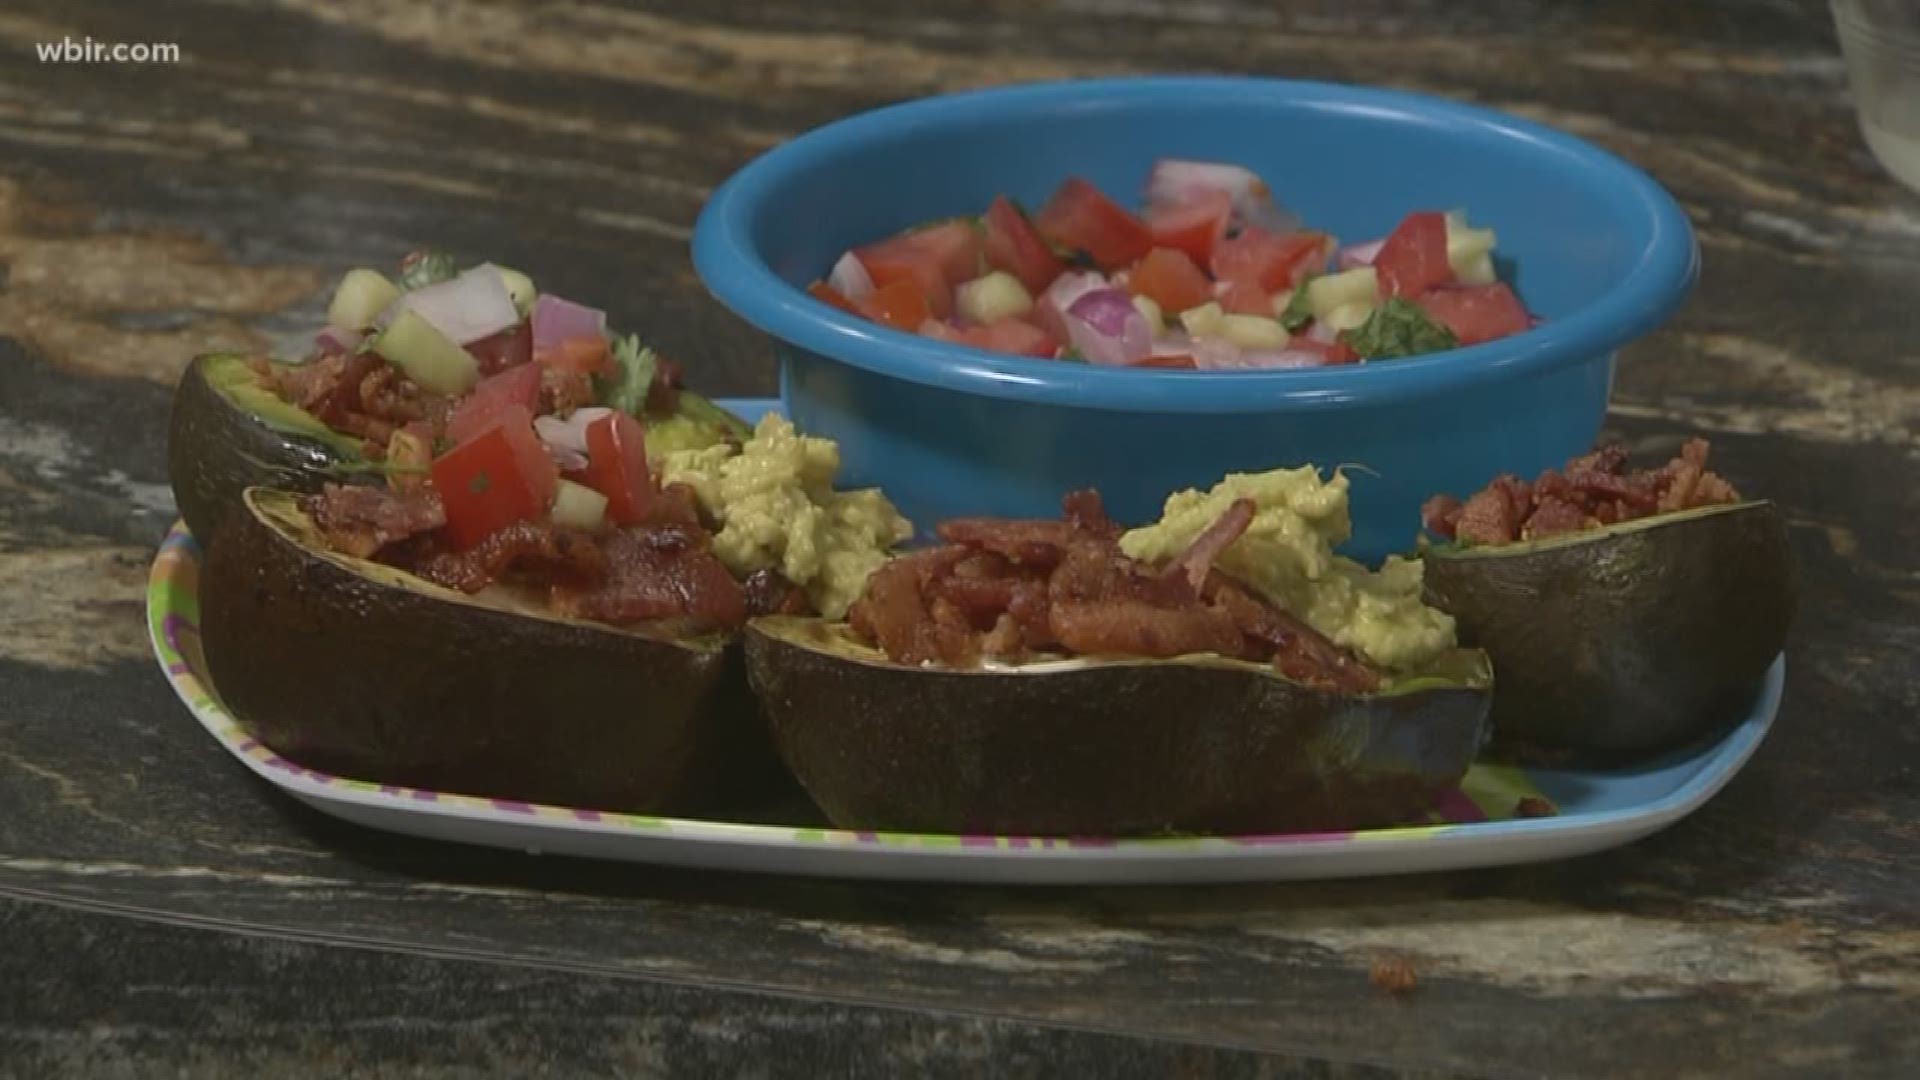 Connie Emmons shares her unique breakfast in an avocado